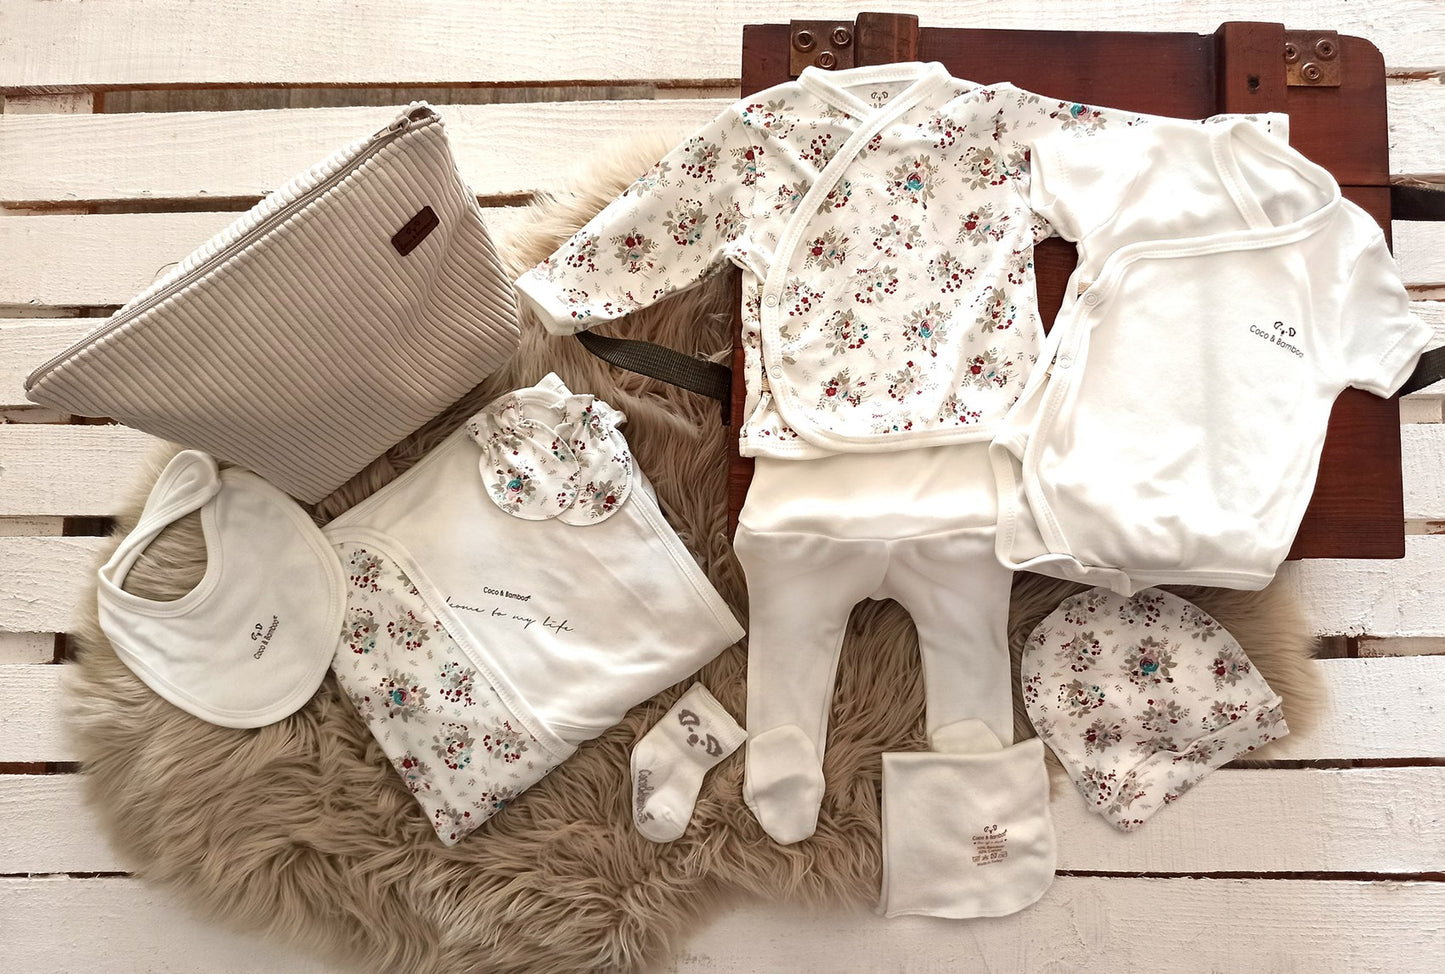 10 Pcs Newborn bamboo cotton set includes Booted bottom, cruise, body, hat, bib, gloves, hand-towel, socks, blanket and Special bag.